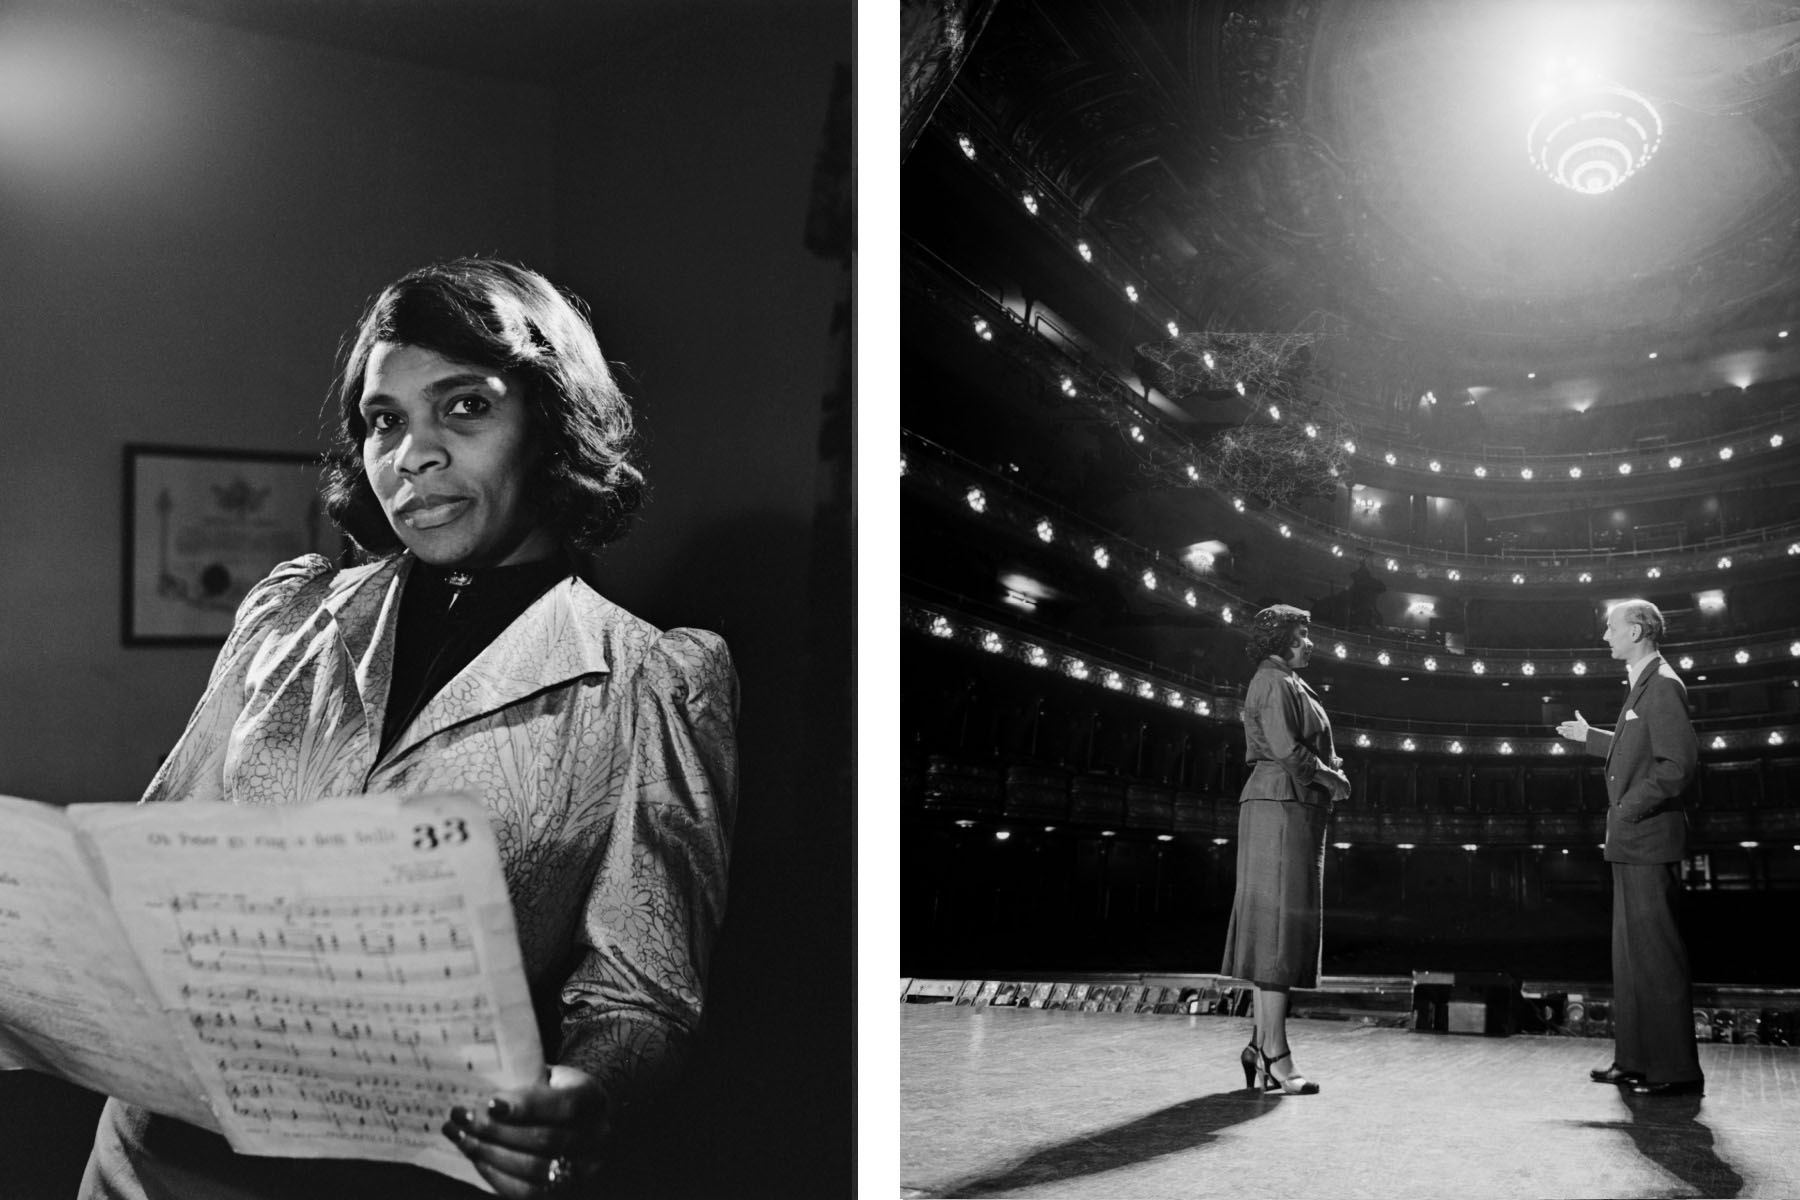 Dyptich of a portrait of singer Marian Anderson holding sheet music and Marian Anderson meeting the Metropolitan Opera's General Manager Rudolf Bing on stage in 1954.